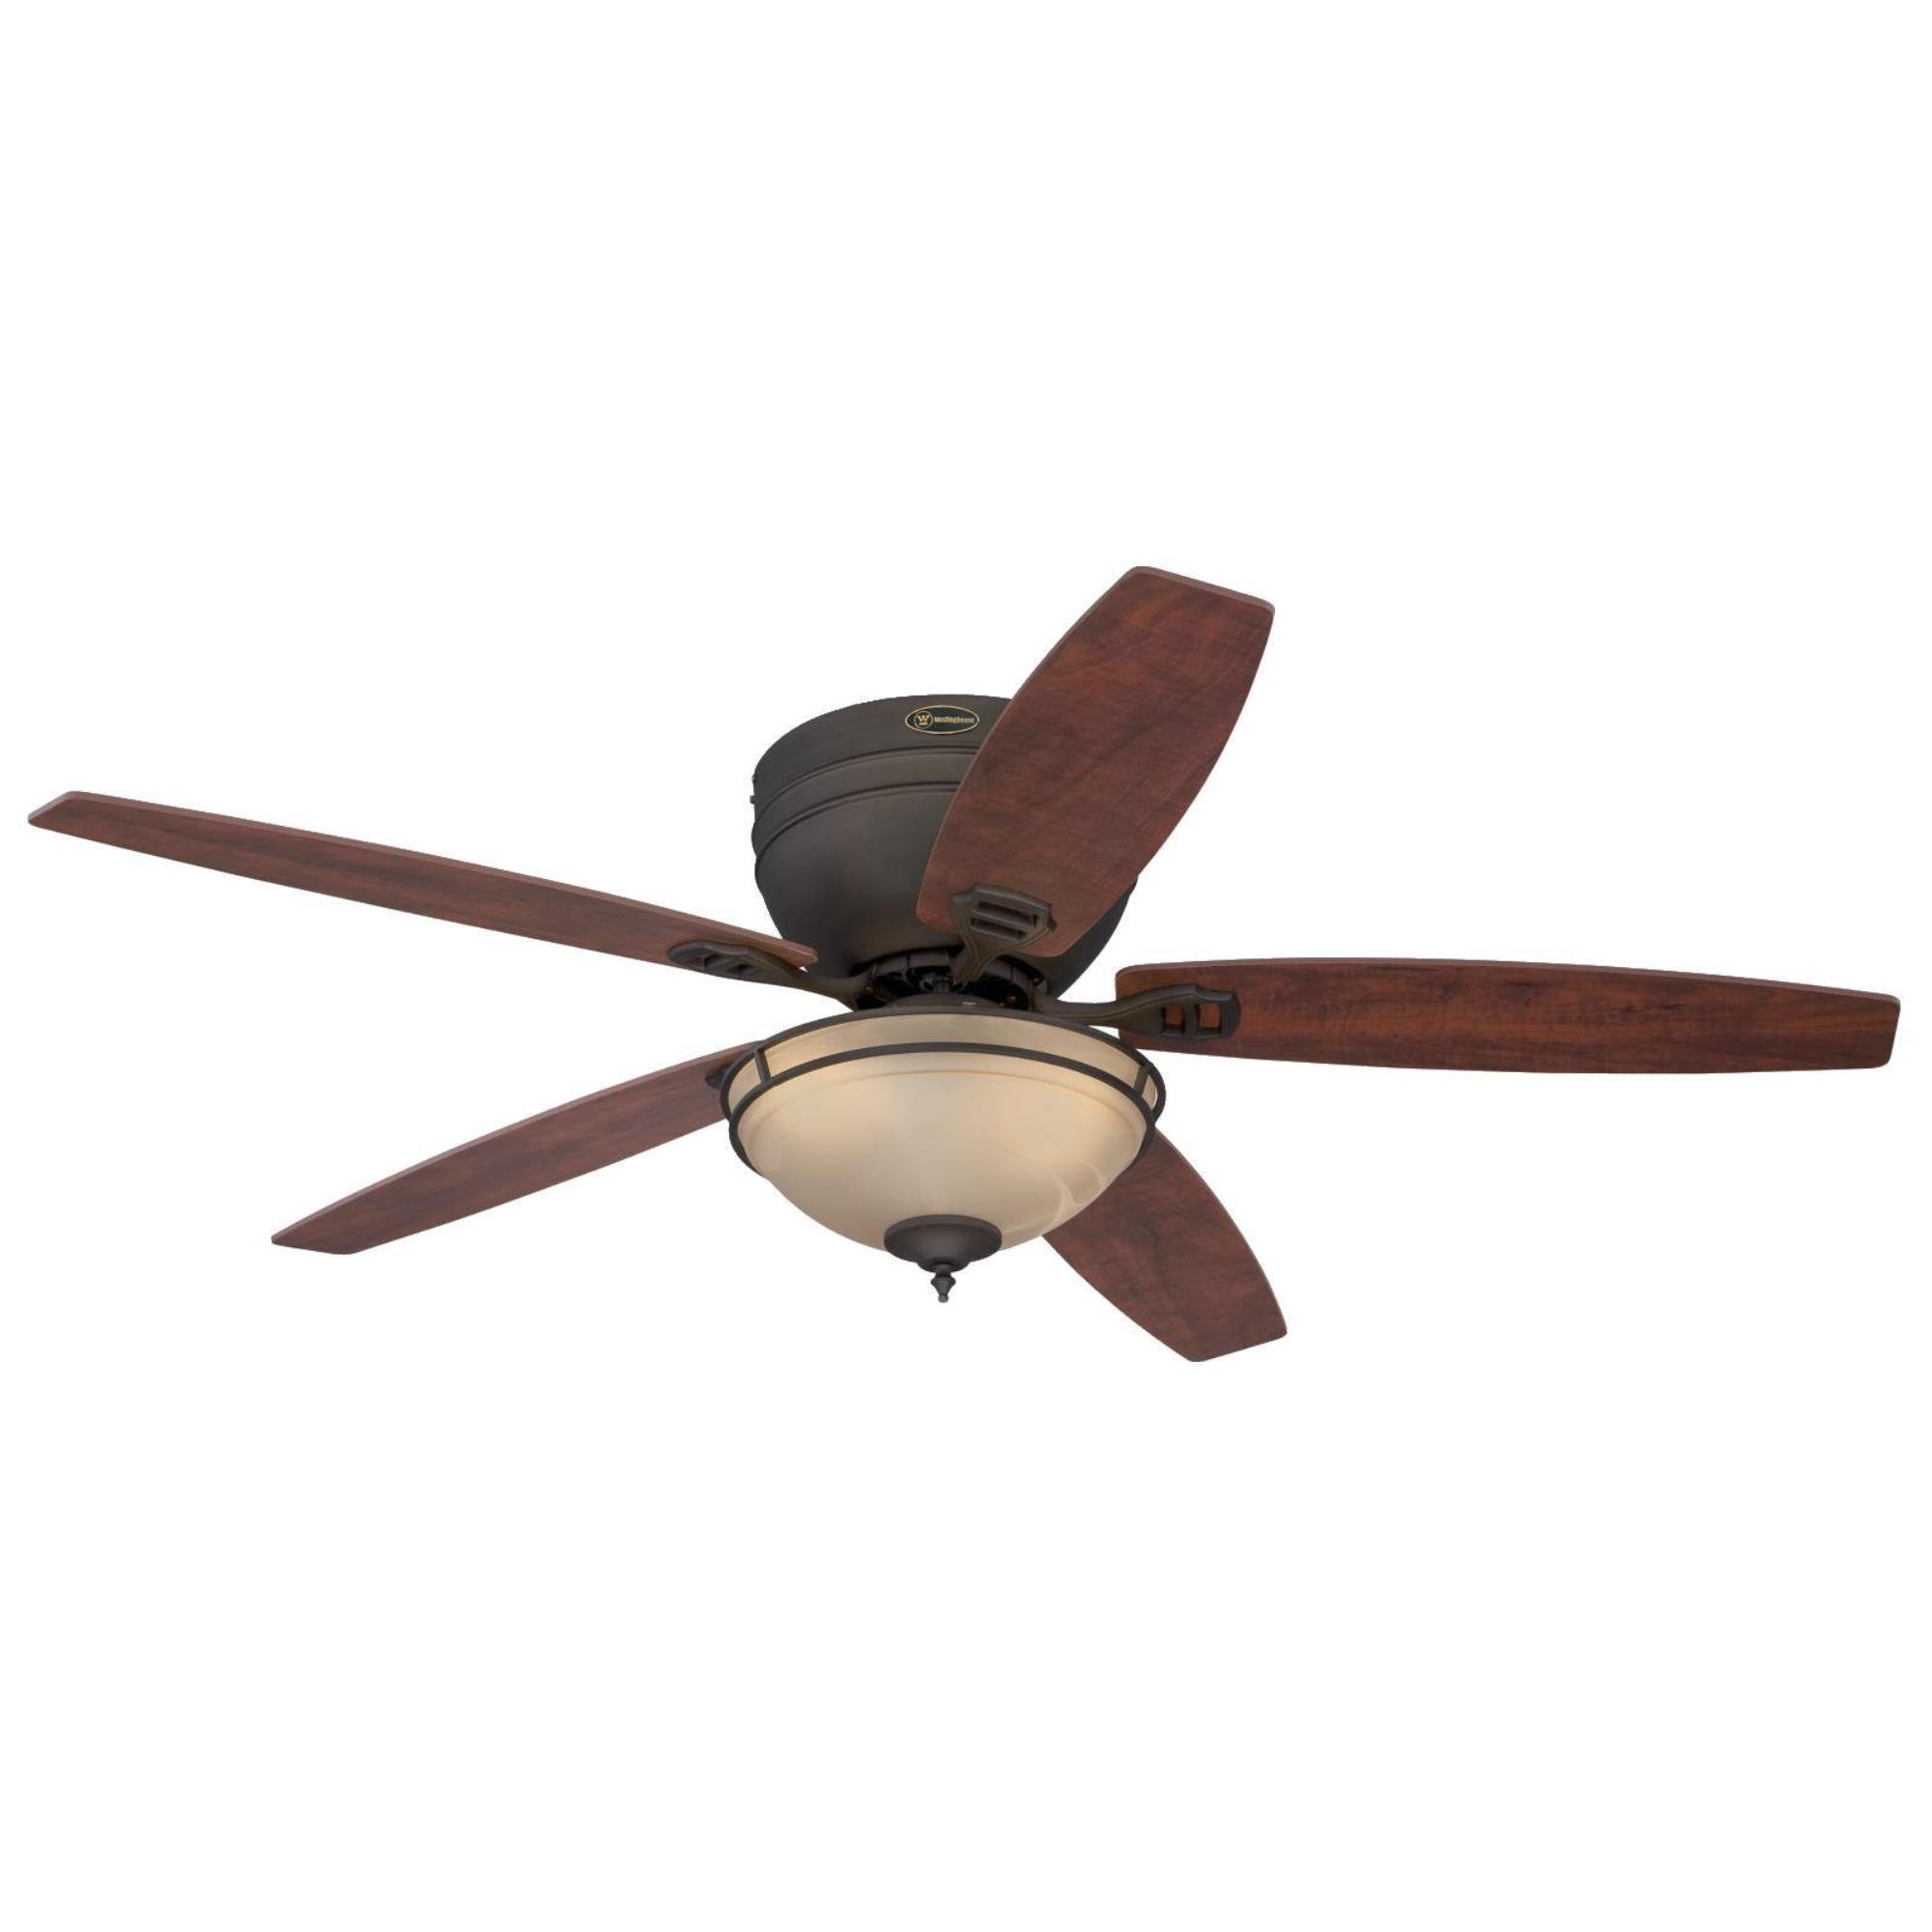 Westinghouse Lighting 7209600 Traditional Carolina LED 52 inch Oil Rubbed Bronze Indoor Ceiling Fan, LED Light Kit with Amber Alabaster Bowl